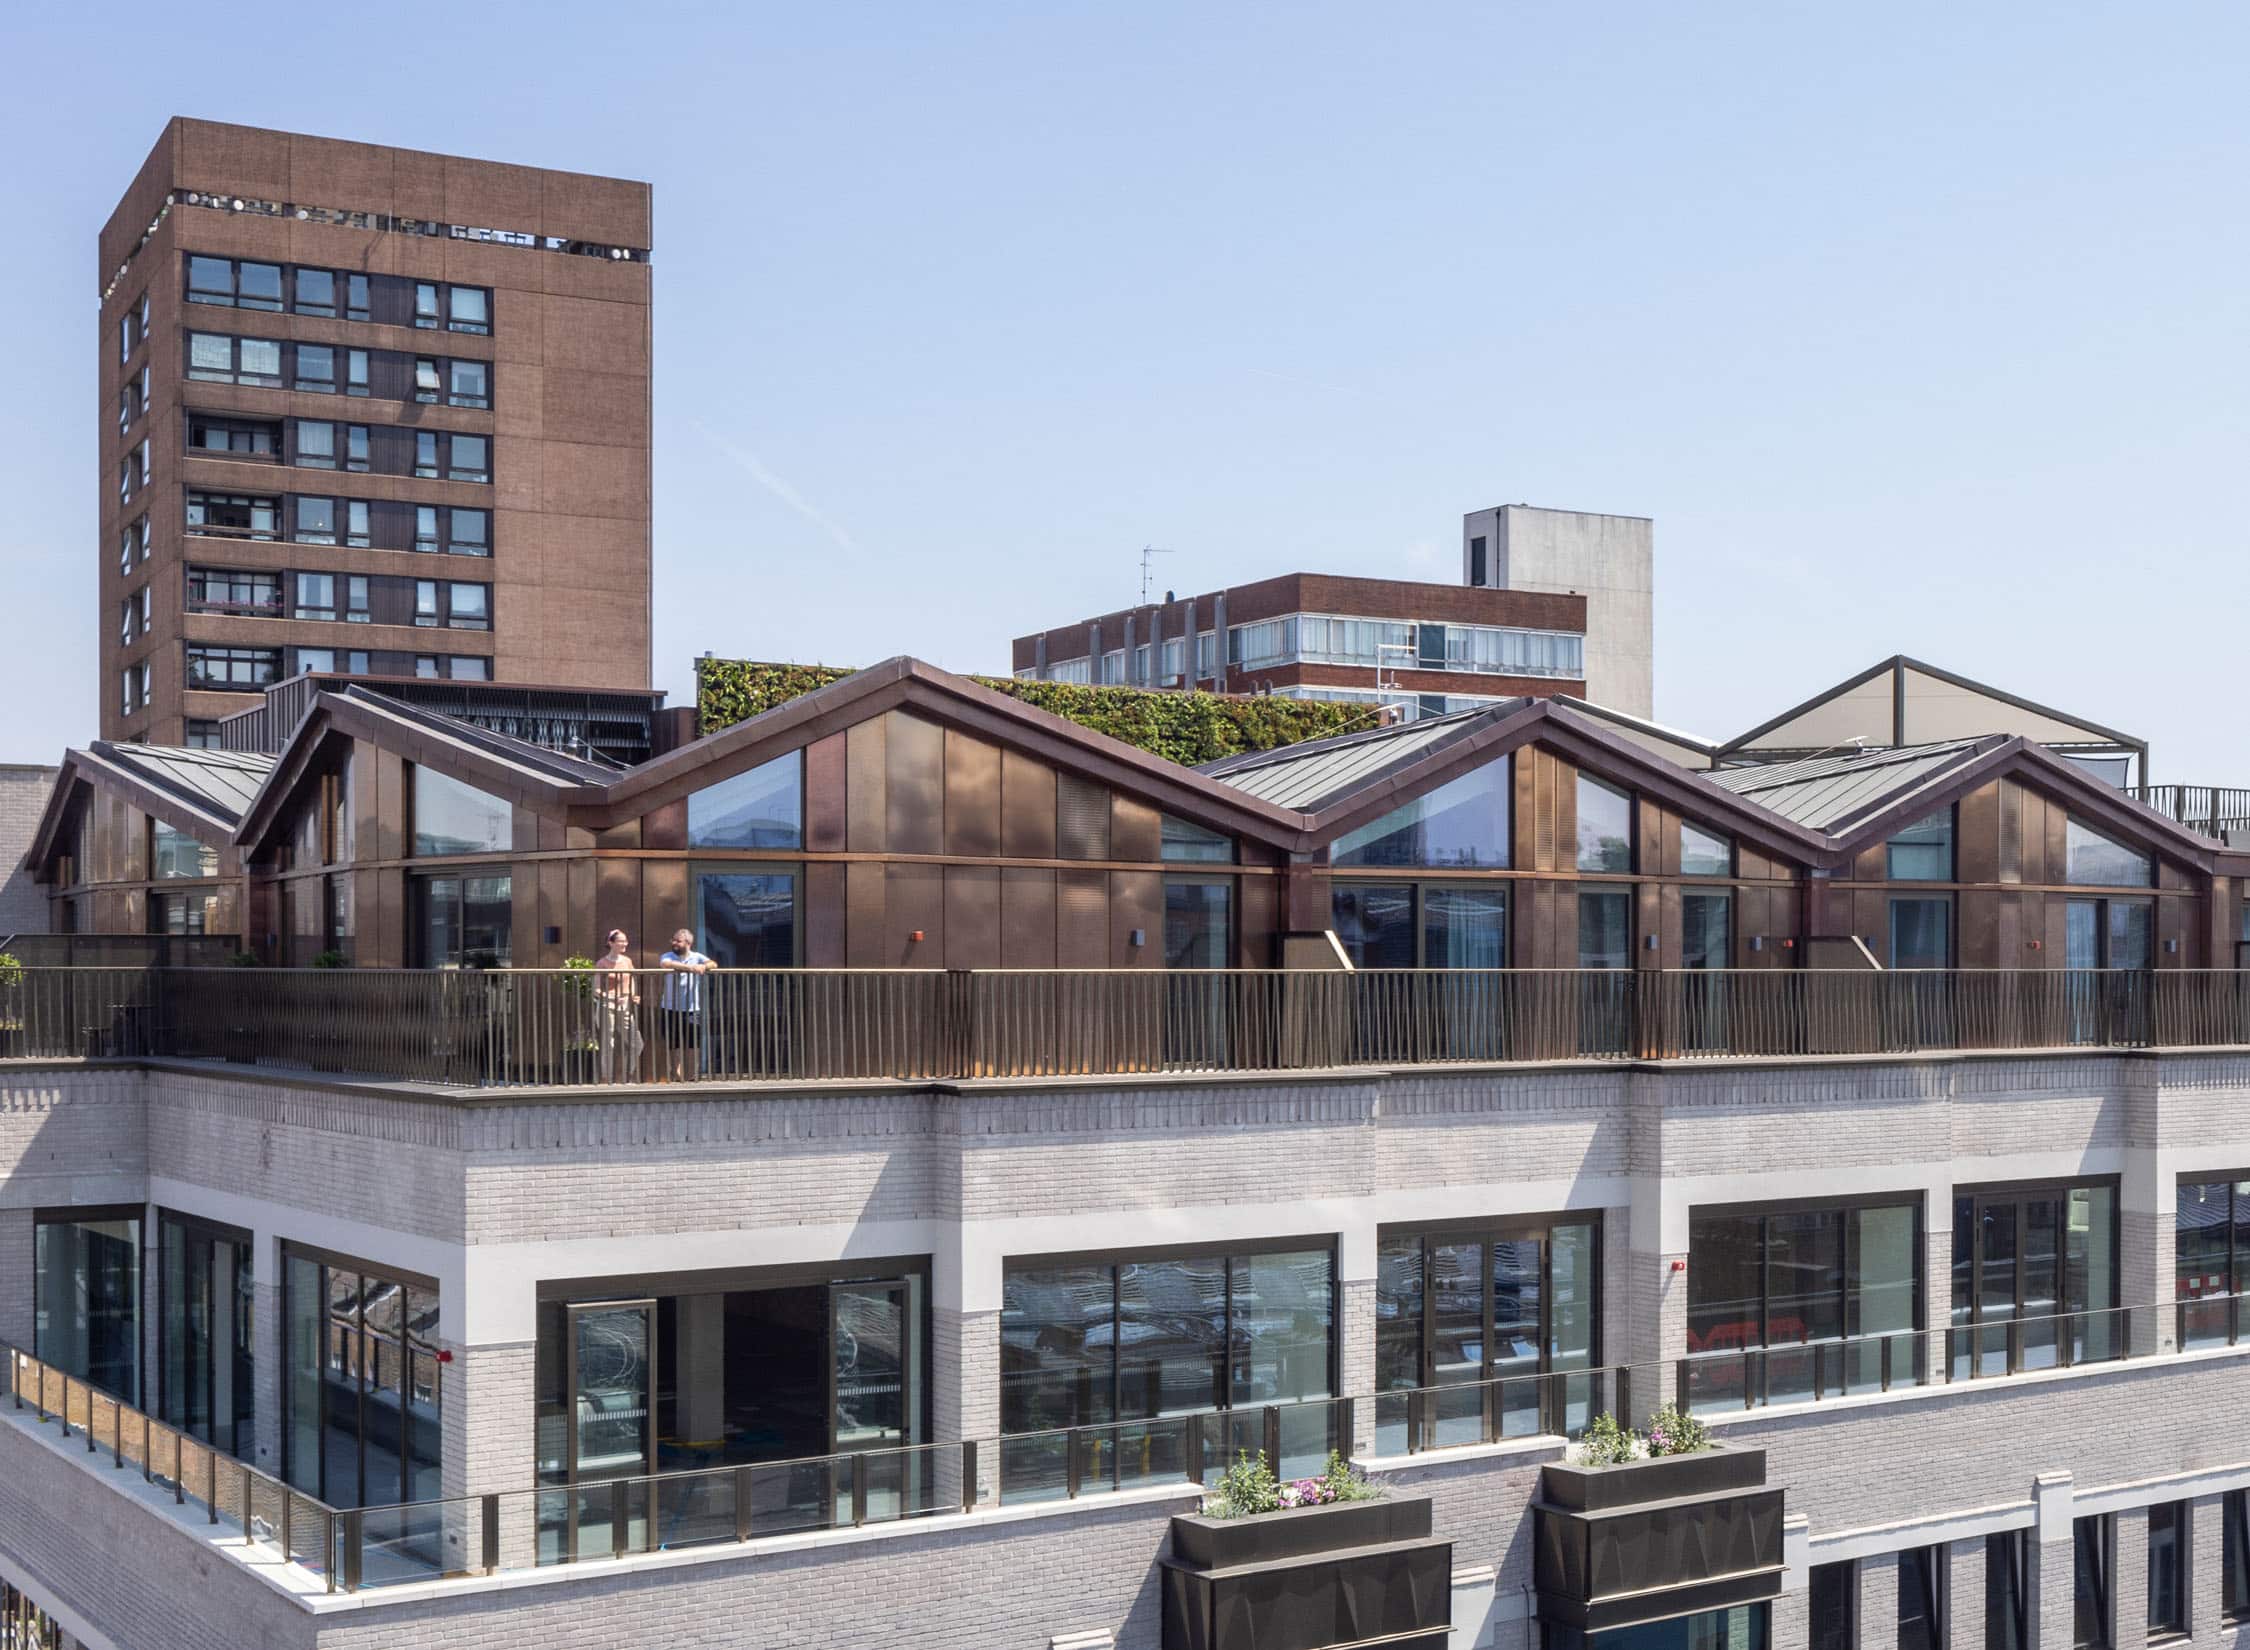 Adaptive reuse of existing buildings is an essential strategy to reduce embodied carbon, while regenerating our urban environments. An exemplar of this approach – 72 Broadwick Street – is crowned by a profiled roofscape clad in Nordic Brown Light copper from Aurubis.